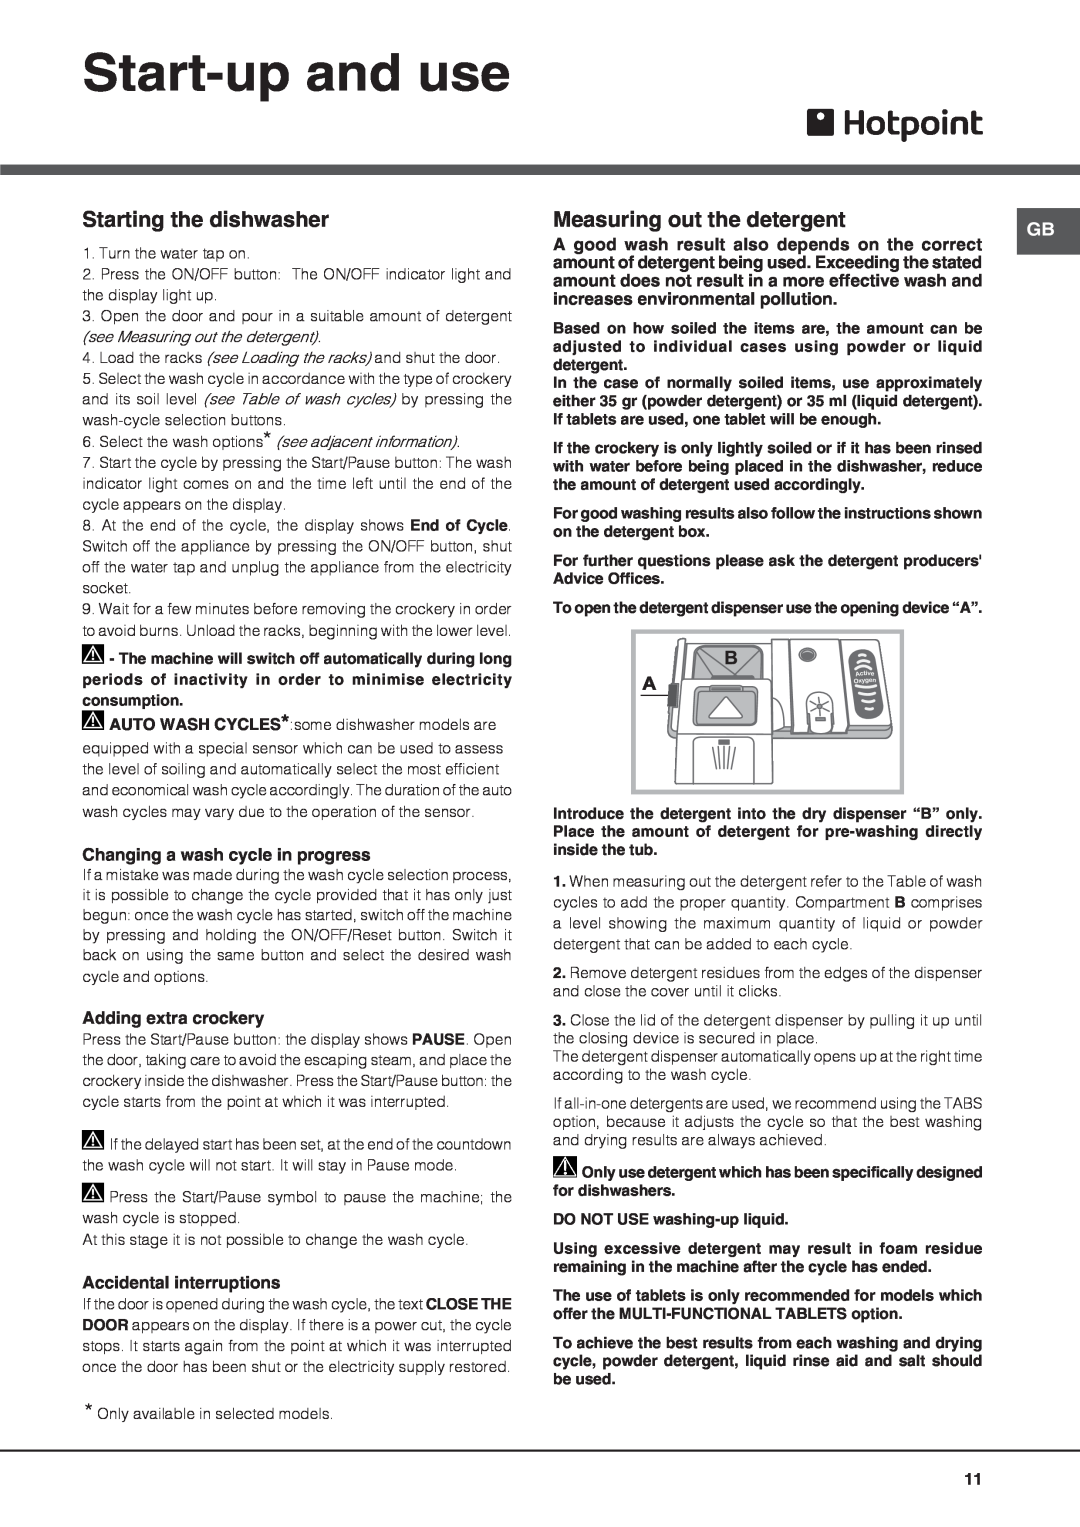 Hotpoint FDUD 43133 Ultima manual Start-up and use, Changing a wash cycle in progress, Adding extra crockery 